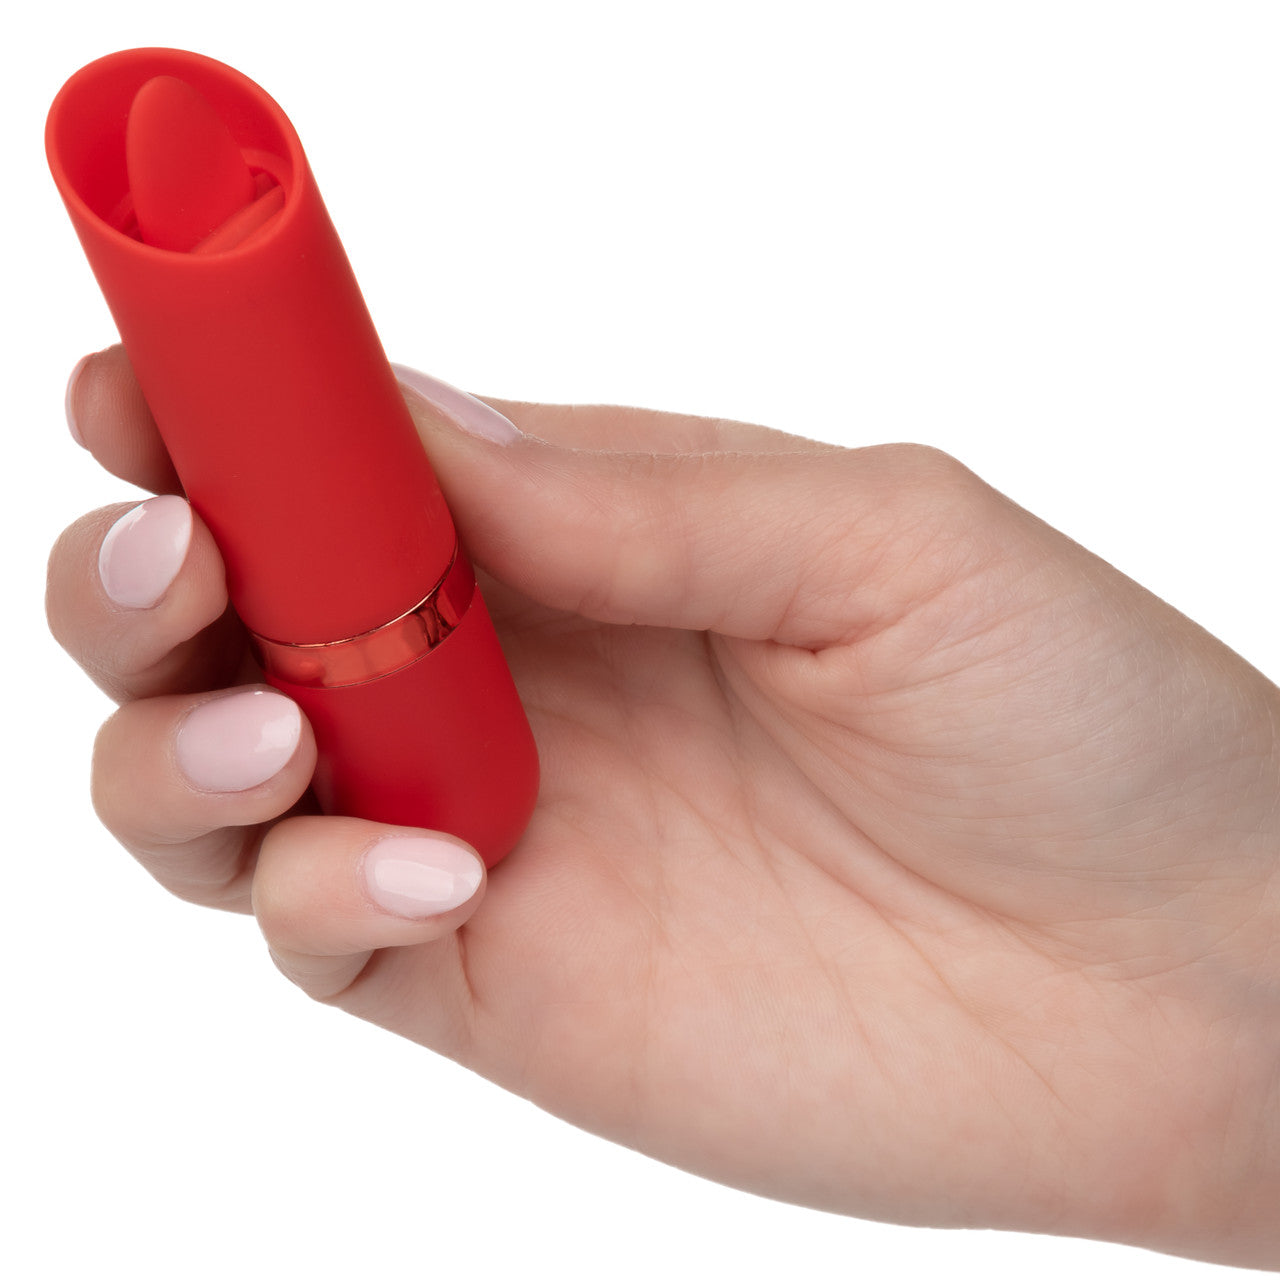 hand holding red lipstick-sized vibrator with small flappy tongue clitoral stimulator at the top